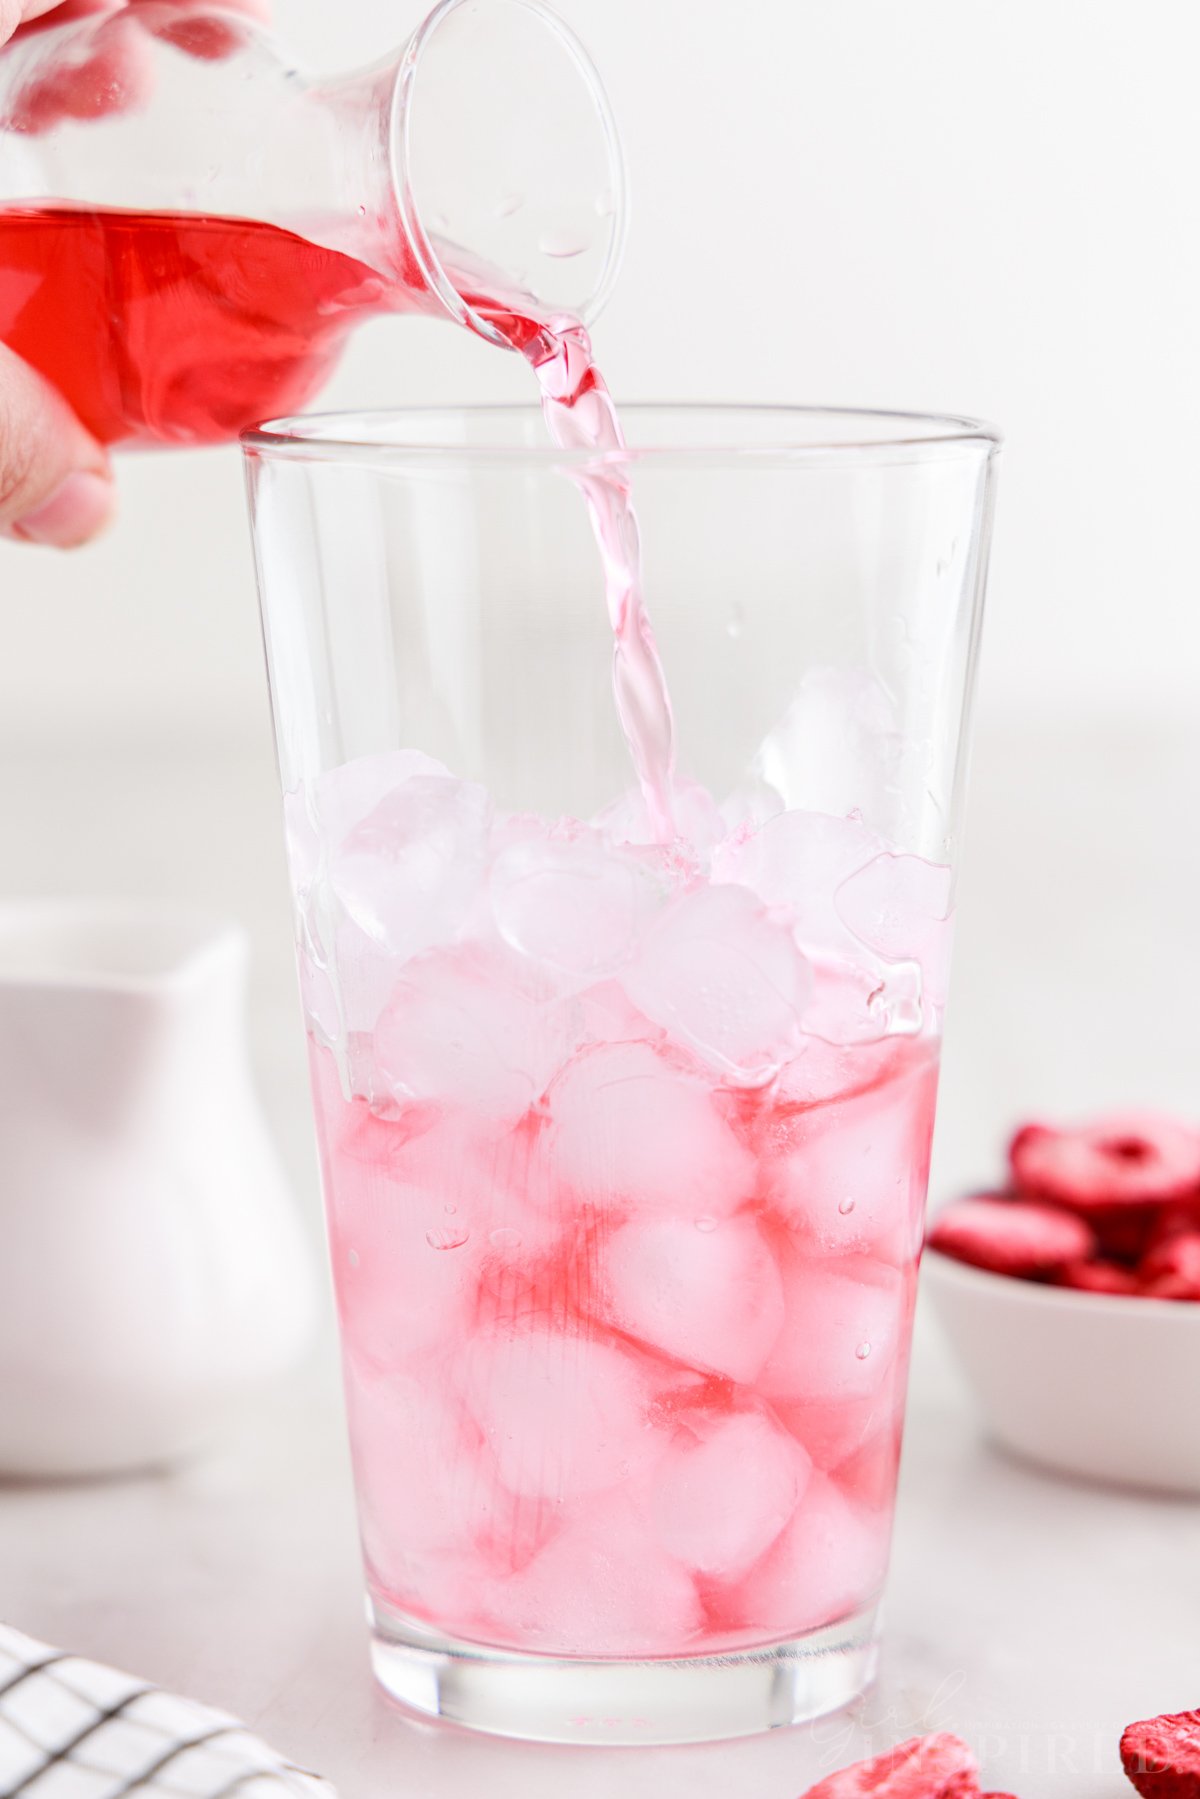 Dark pink tea-infused juice poured into a glass of ice.